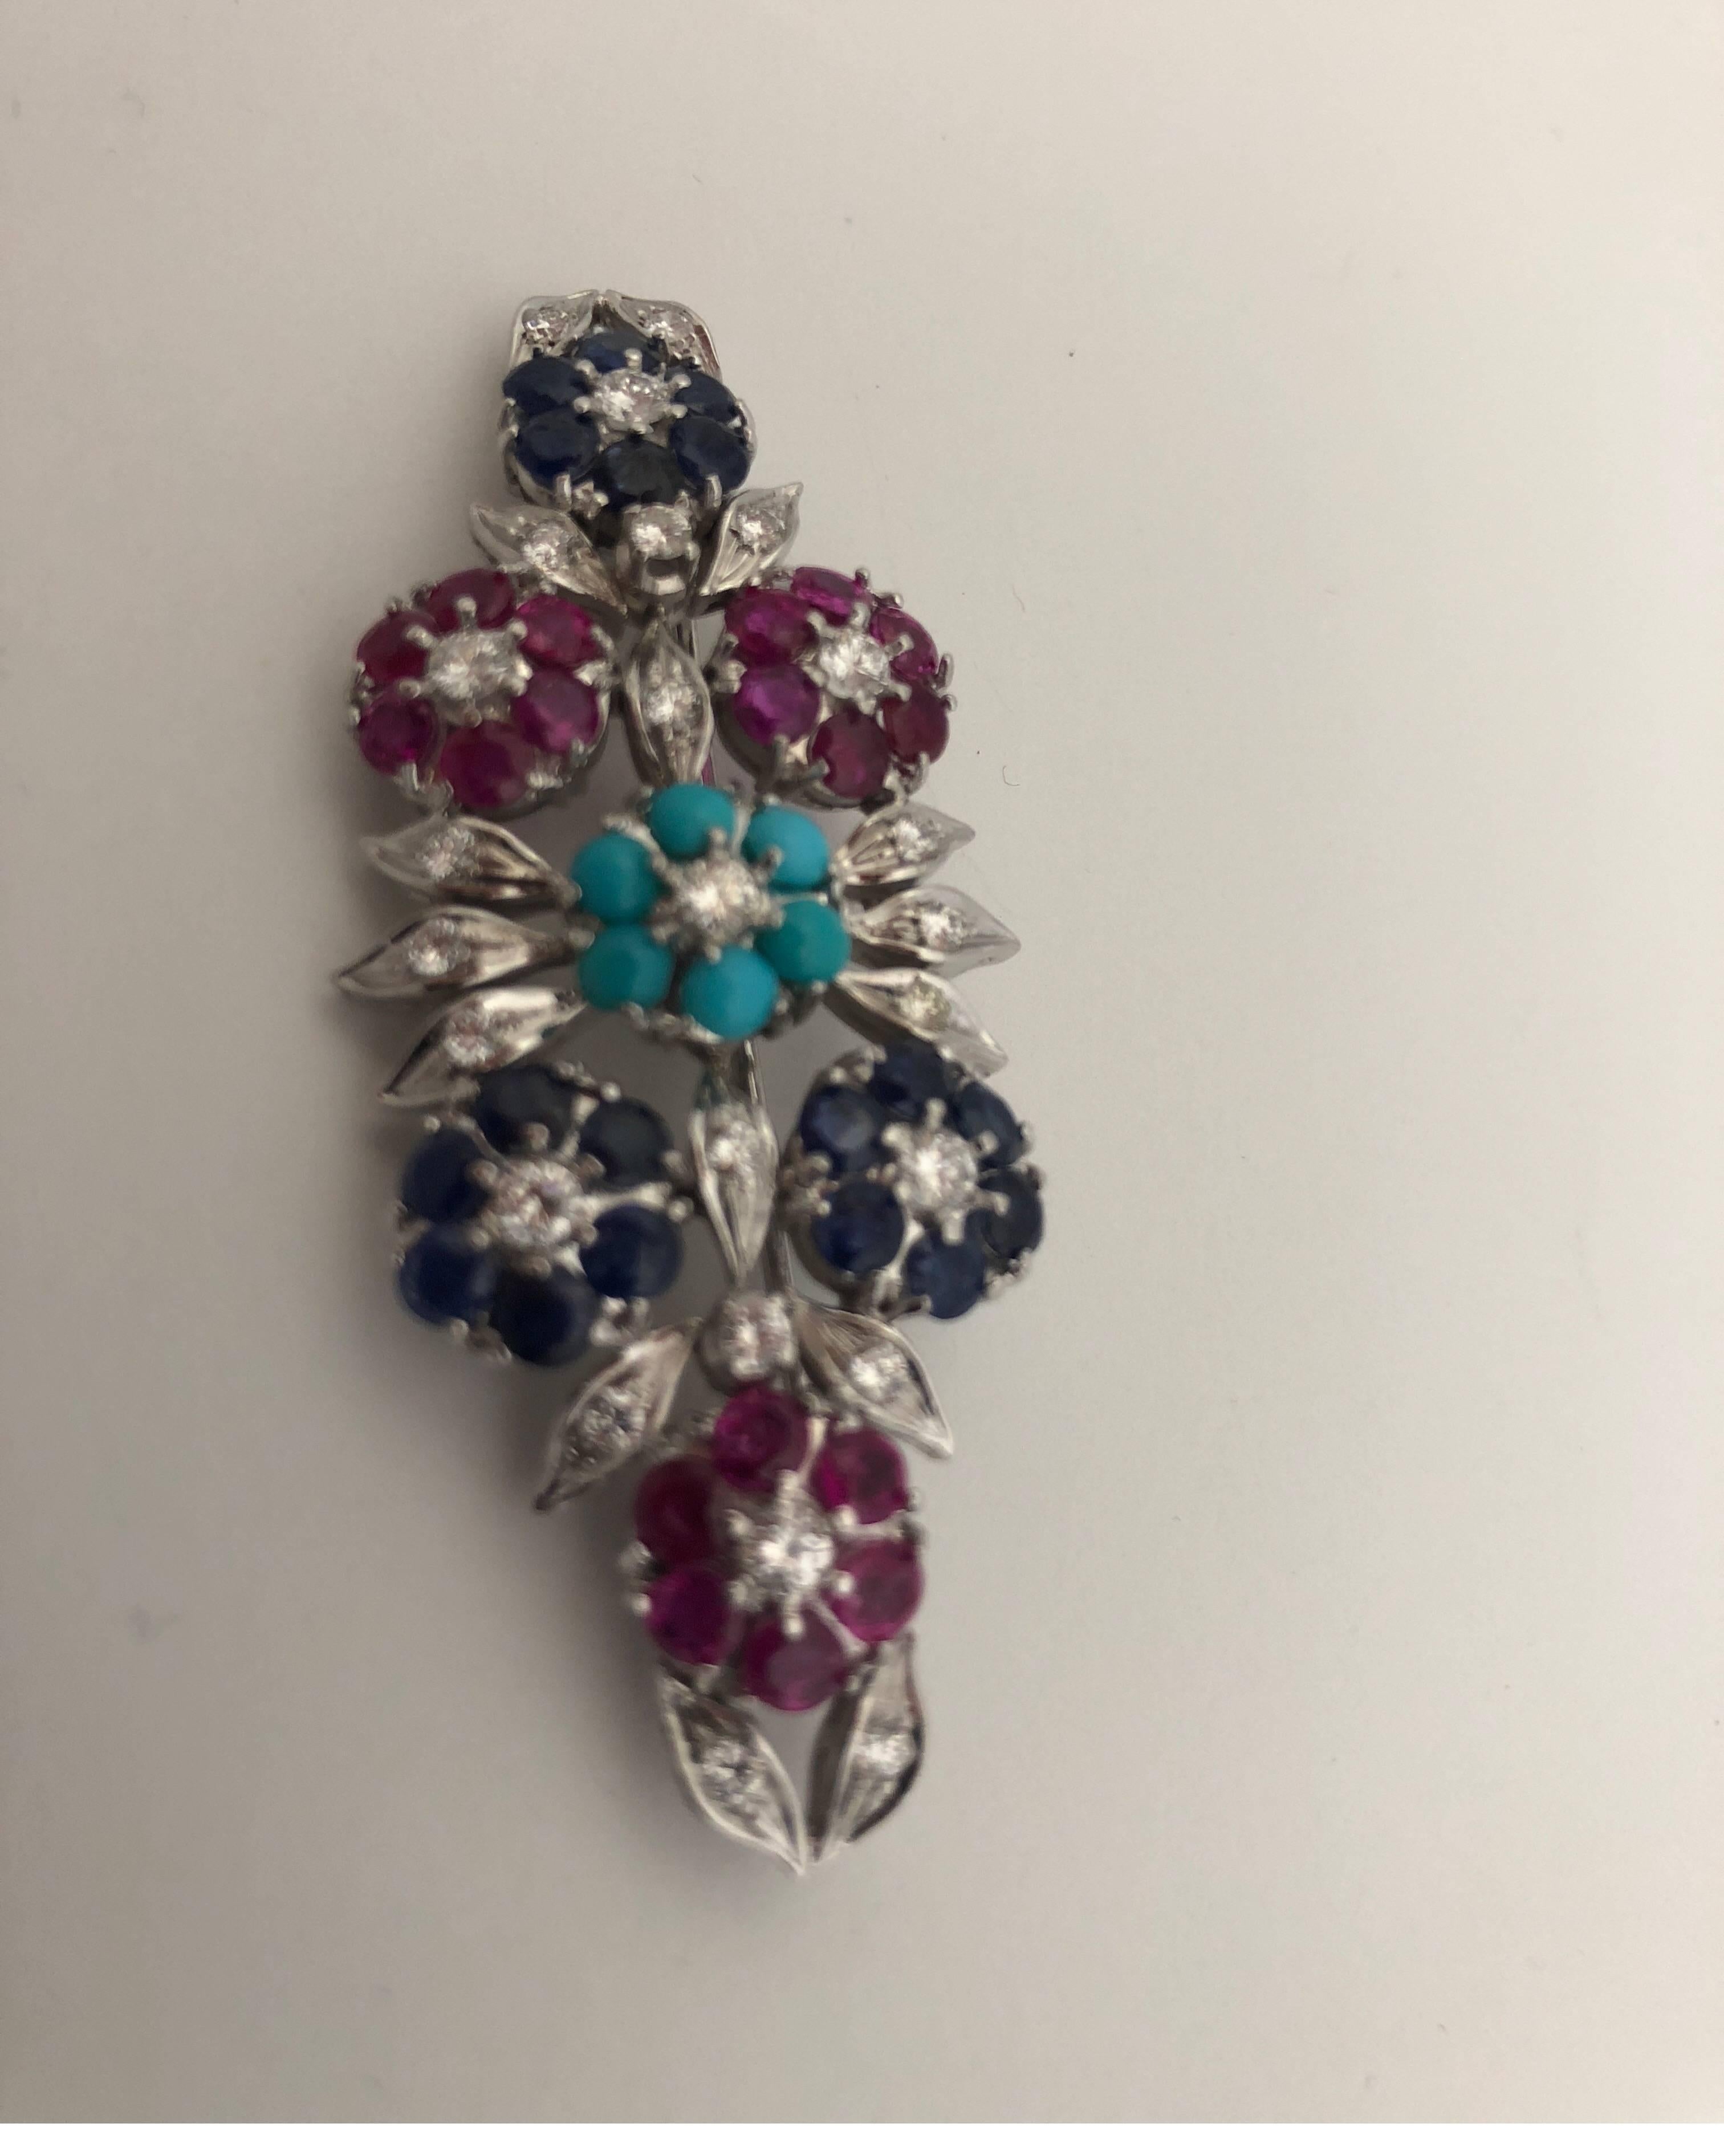 White gold 18 kt brooch with white diamonds, blue sapphire, ruby and turquoise
total weight of gold gr 16.50
total weight of diamonds ct 1.80
total weight of ruby ct 2.47 
total weight of blue sapphire ct 2.70
total weight of turquoise g 0.15
STAMP